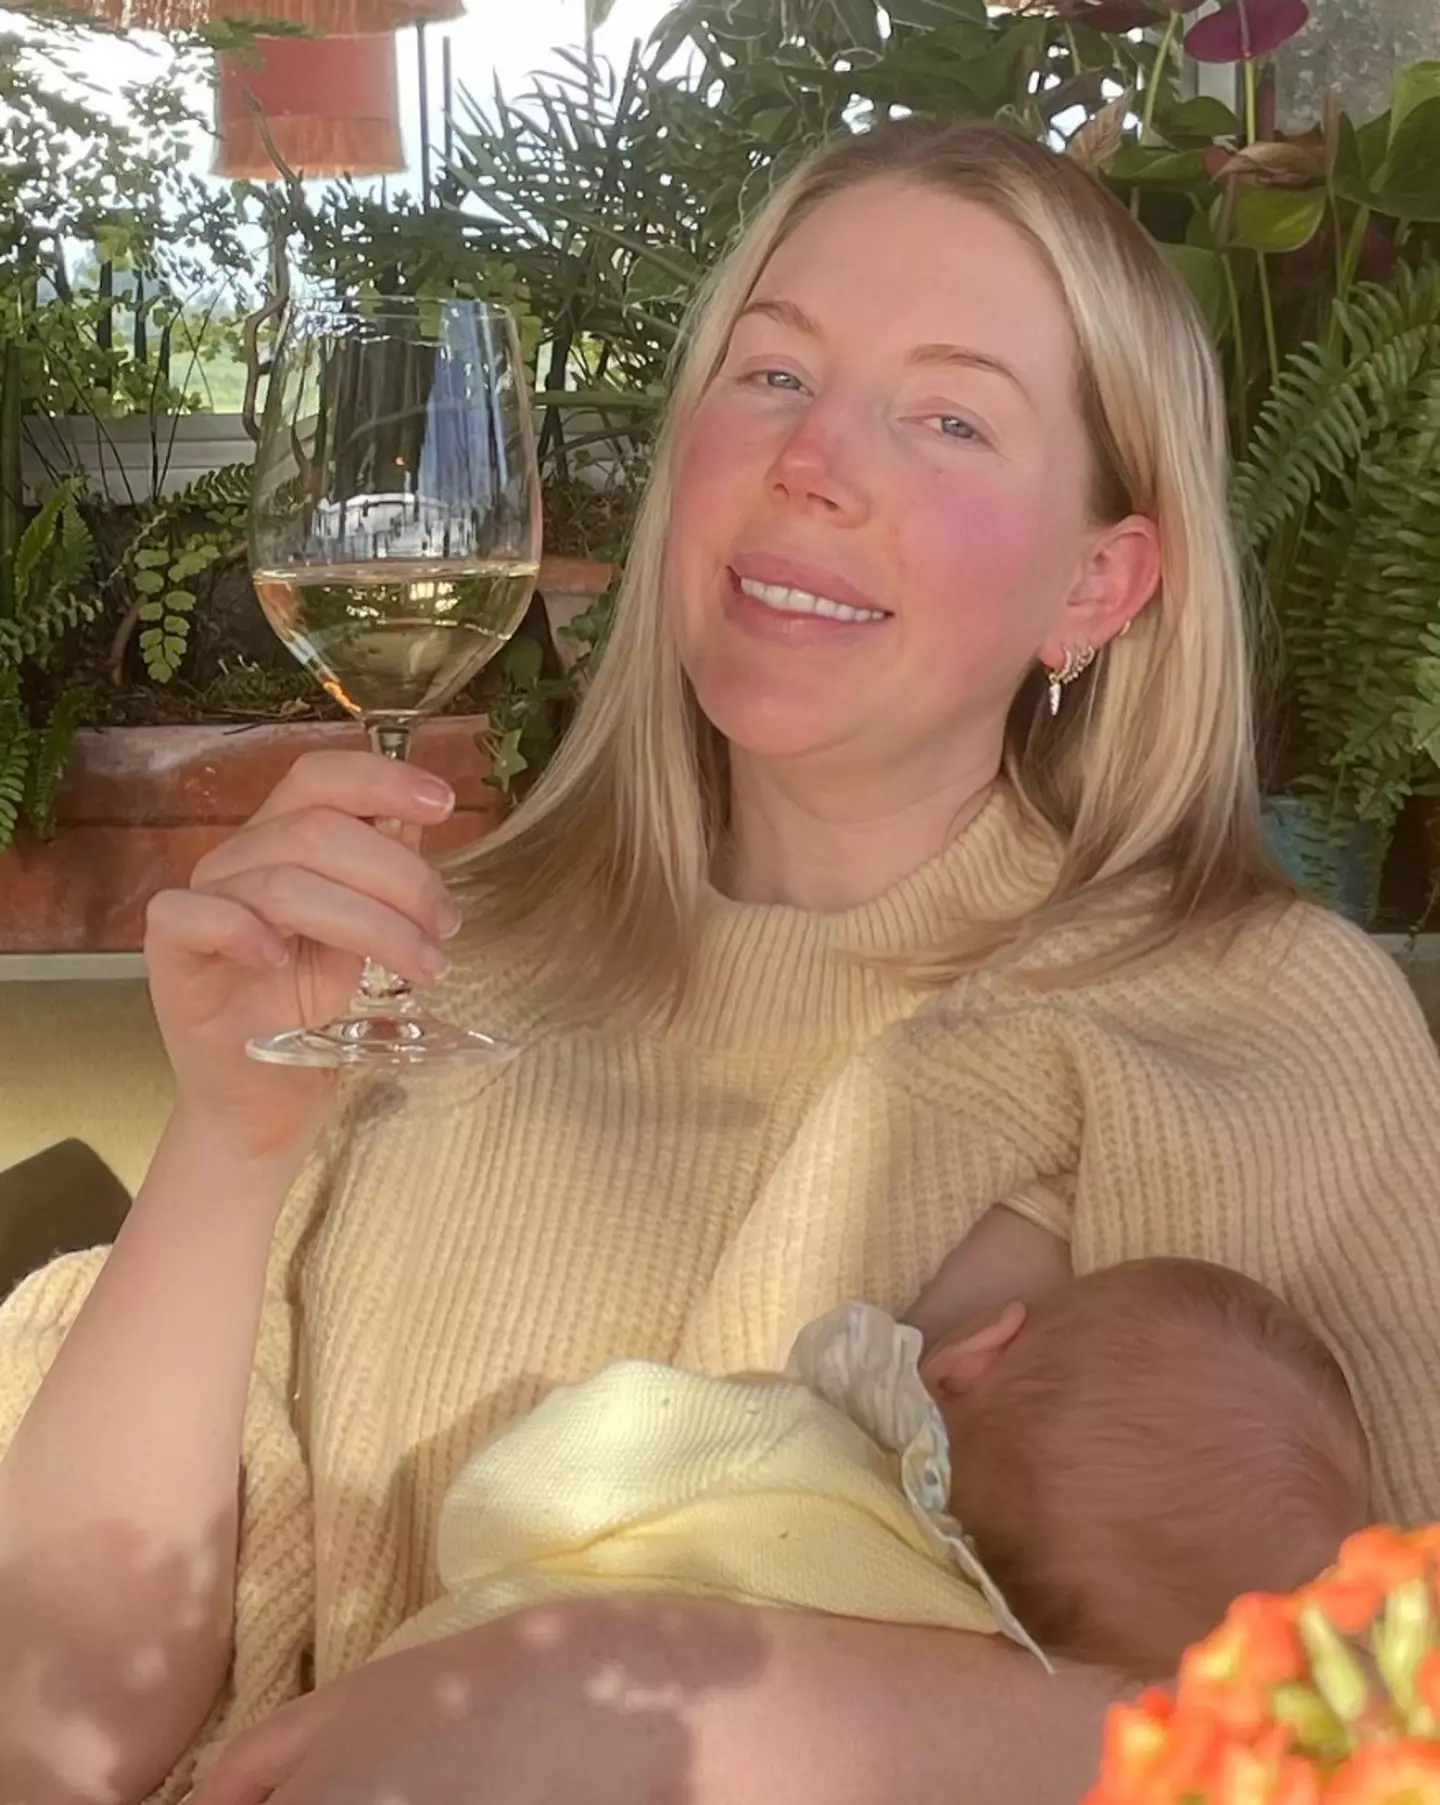 Many slammed the comedian for drinking while breastfeeding.